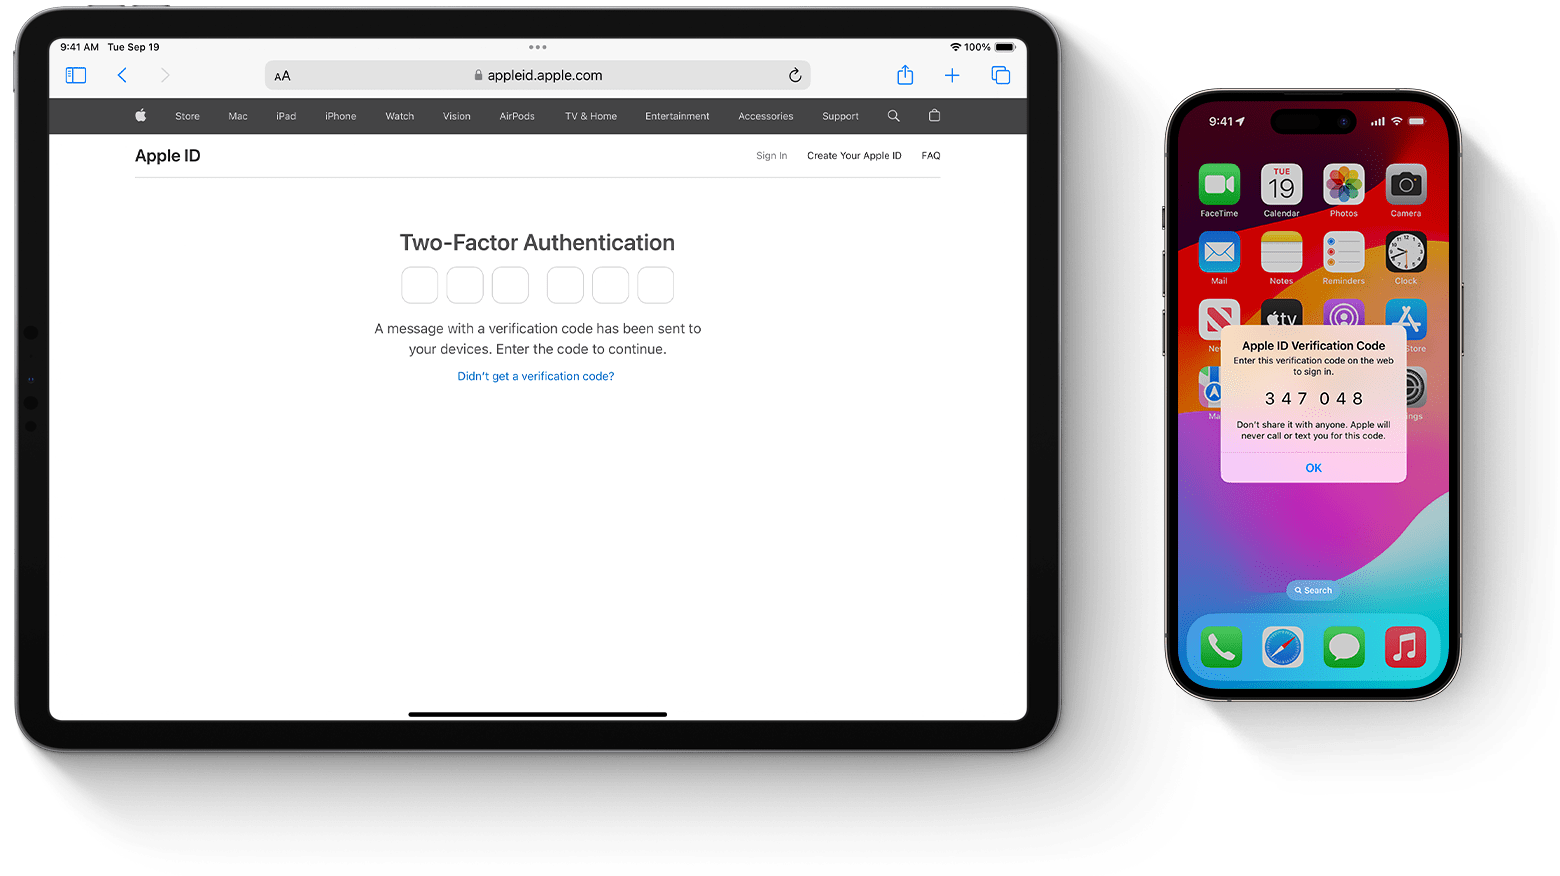 Two-factor authentication for Apple ID - Apple Support